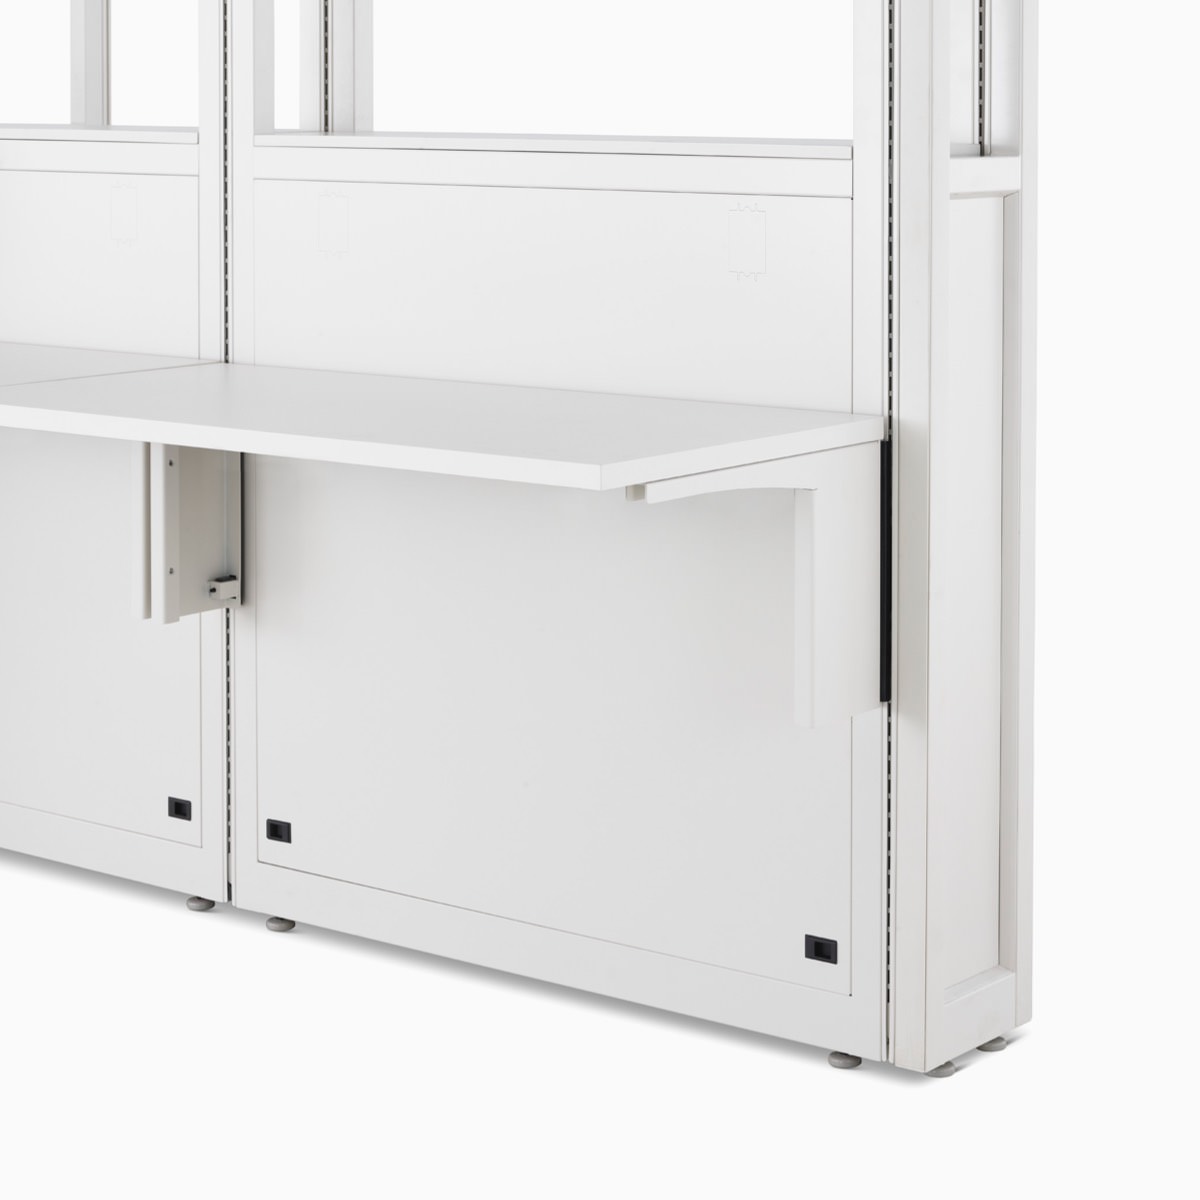 Detail of Co/Struc System module with work surfaces in soft white.